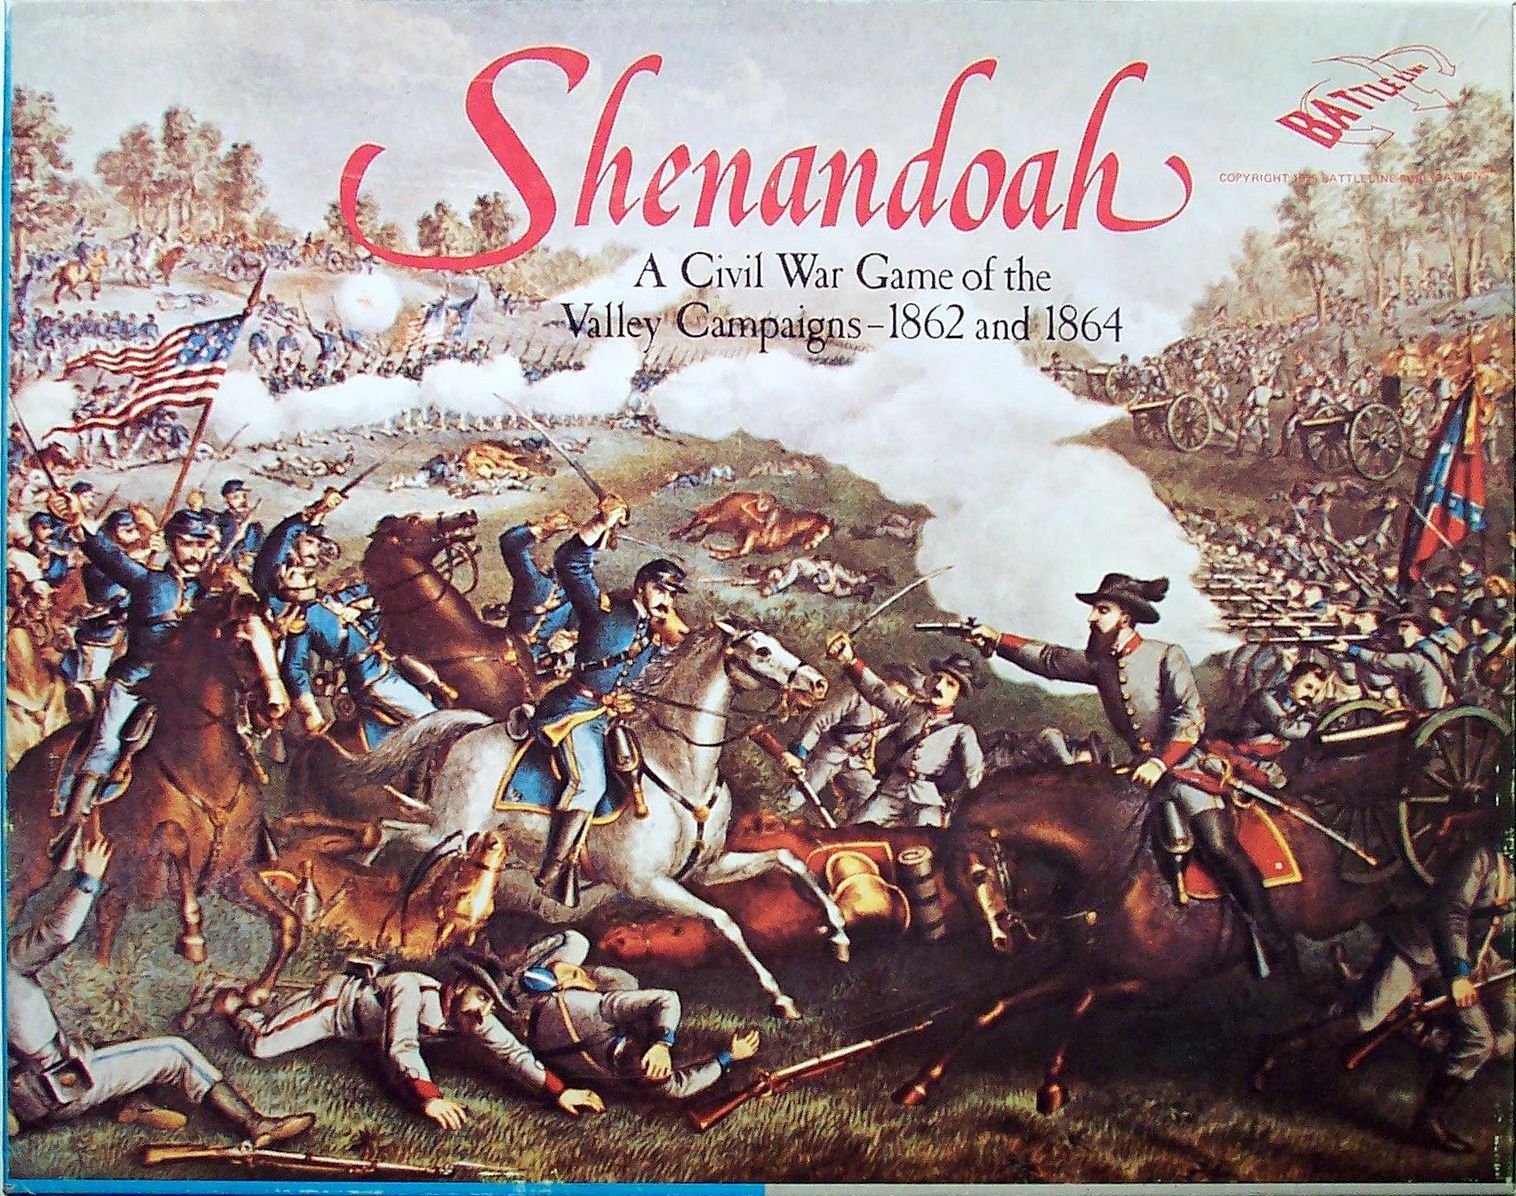 Shenandoah: A Civil War Games of the Valley Campaigns – 1862 and 1864